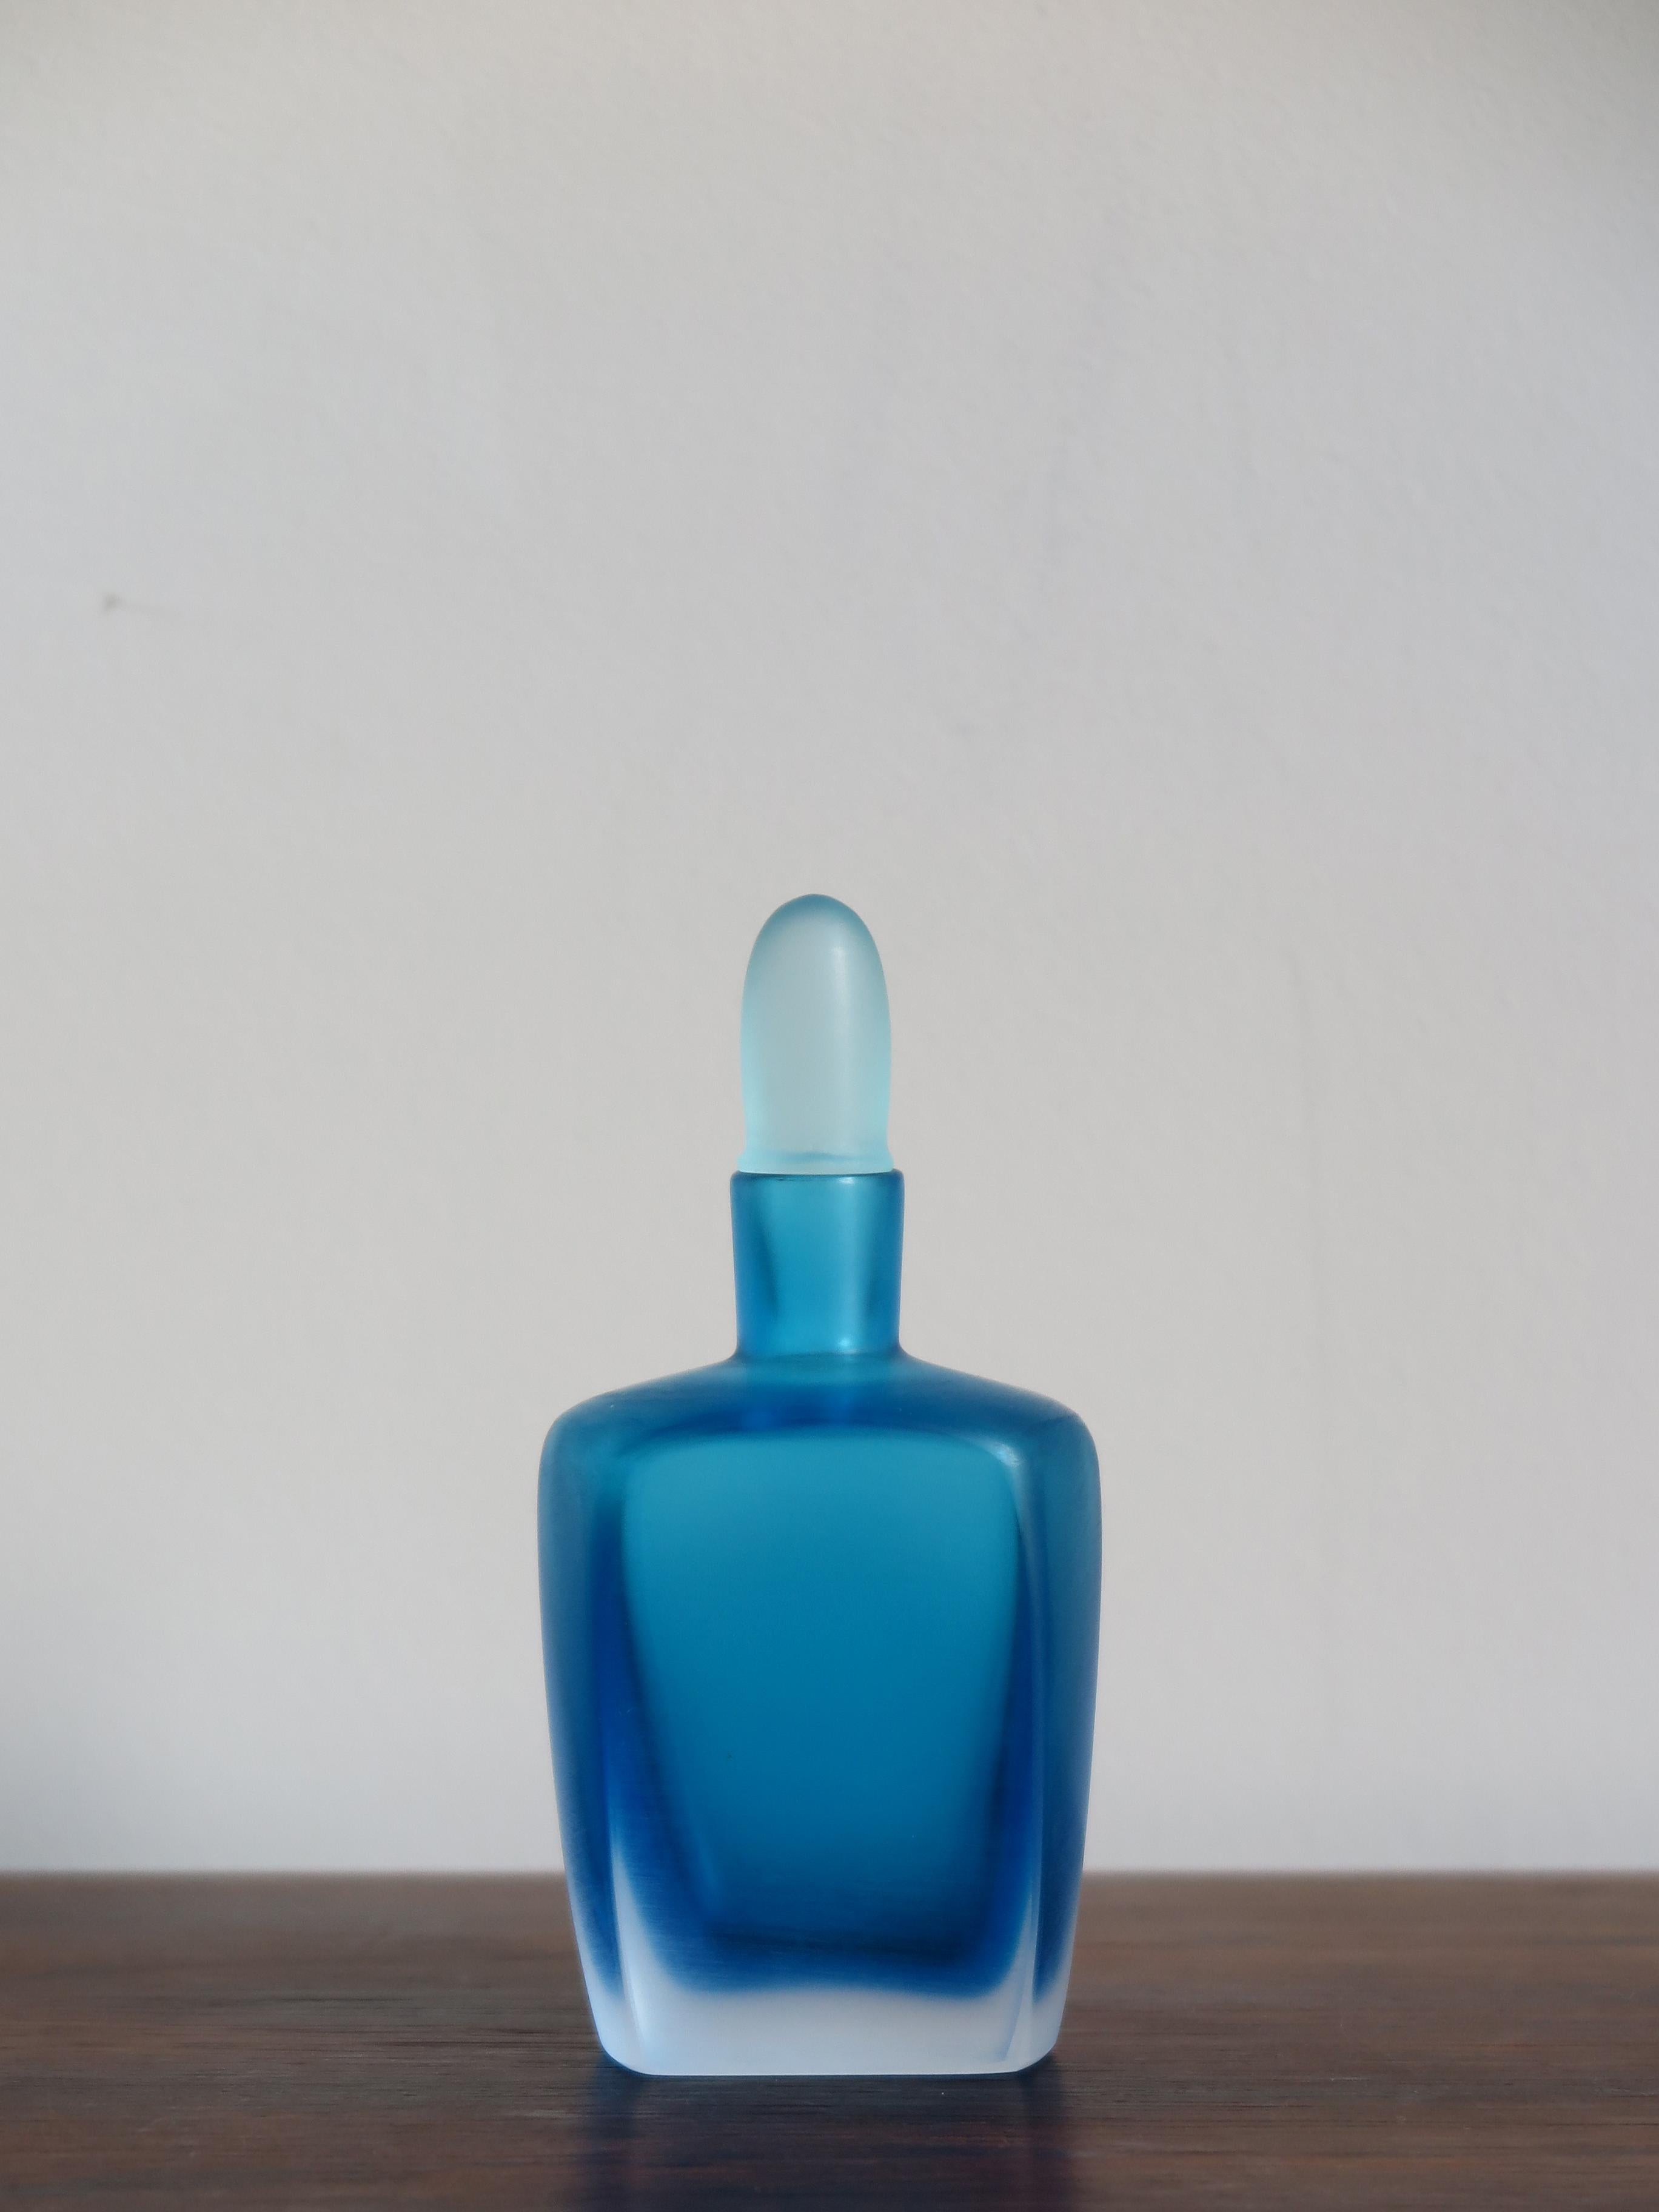 Amazing and fabulous Italian handmade and blown bottle in light blue color glass with stopper, from the “Velati” series designed and produced by Venini Murano in 1992.

Logo 